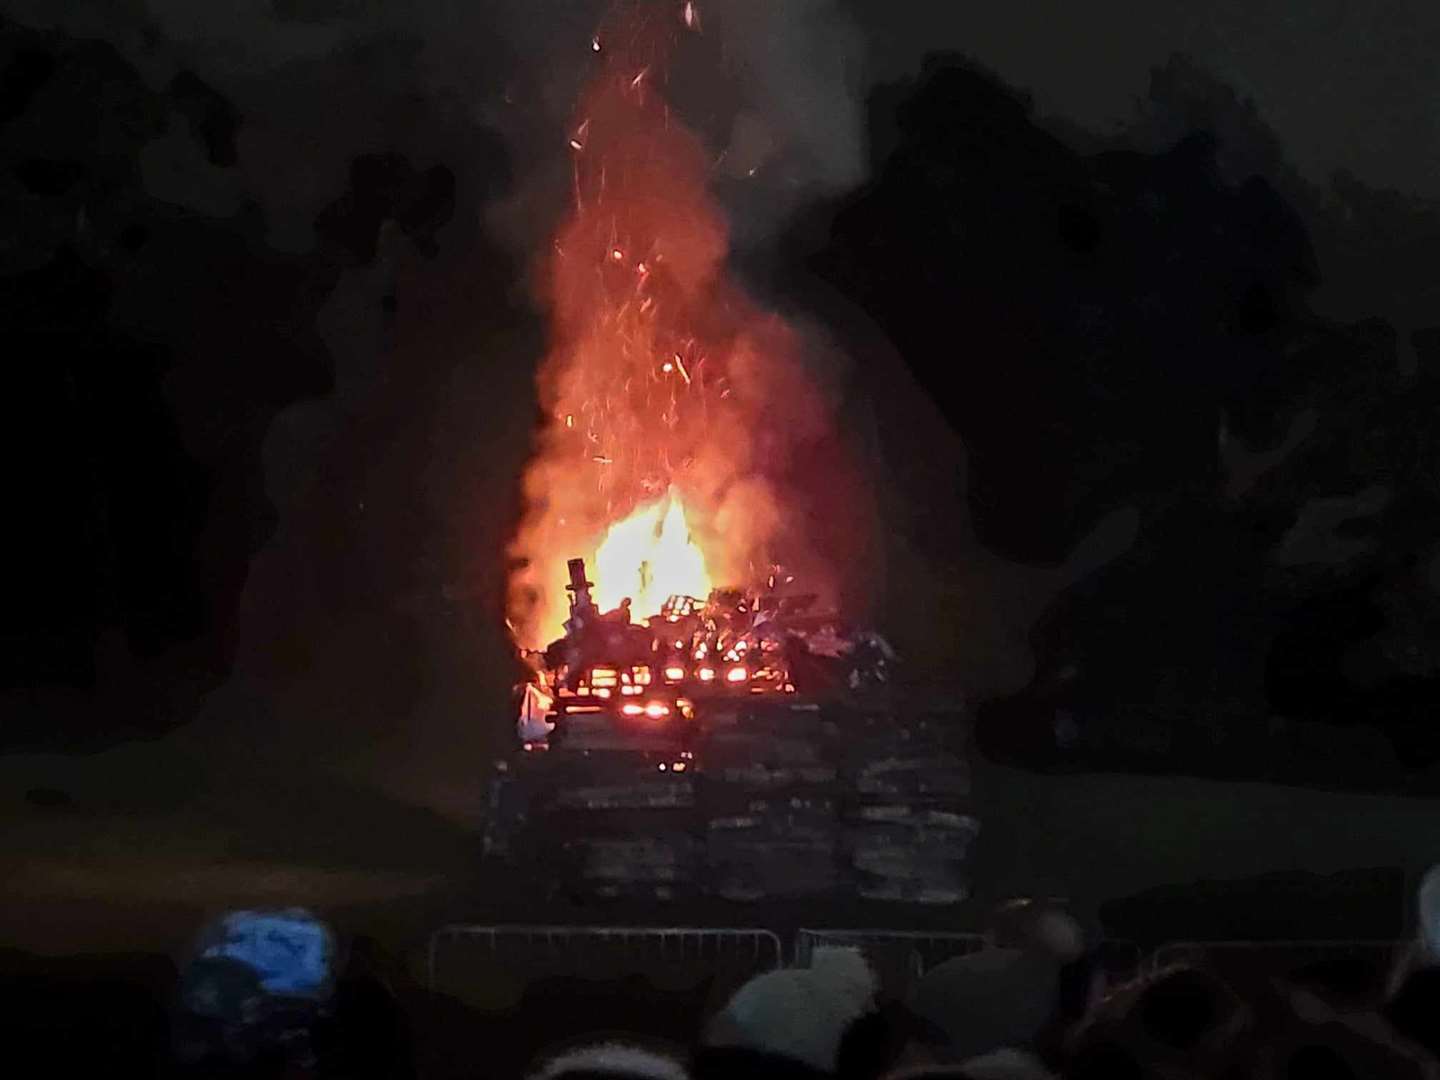 The Guy Fawkes up in flames just before the fireworks display.